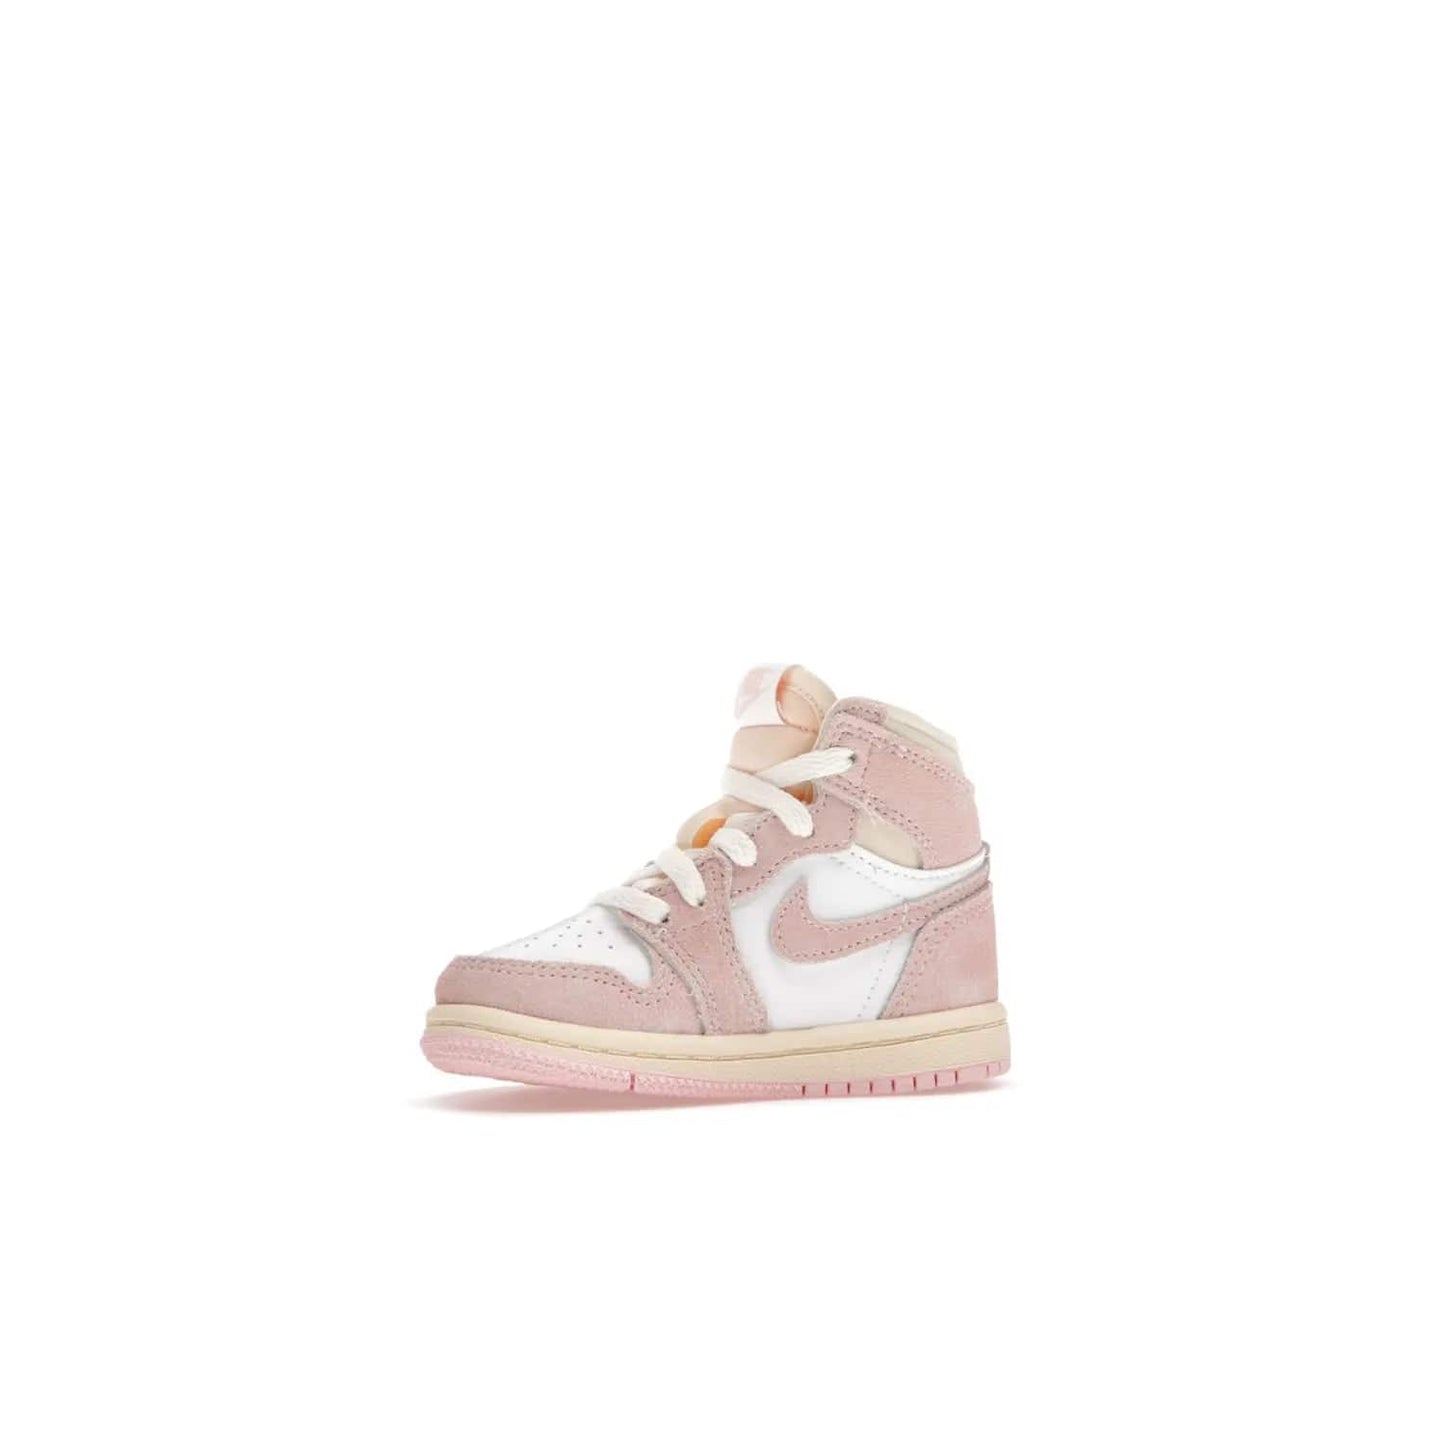 Jordan 1 Retro High OG Washed Pink (TD) - Image 17 - Only at www.BallersClubKickz.com - Retro style meets modern comfort: Introducing the Jordan 1 High OG Washed Pink (TD). Combining Atmosphere/White/Muslin/Sail colors with a high-rise silhouette, these shoes will be an instant classic when they release April 22, 2023.